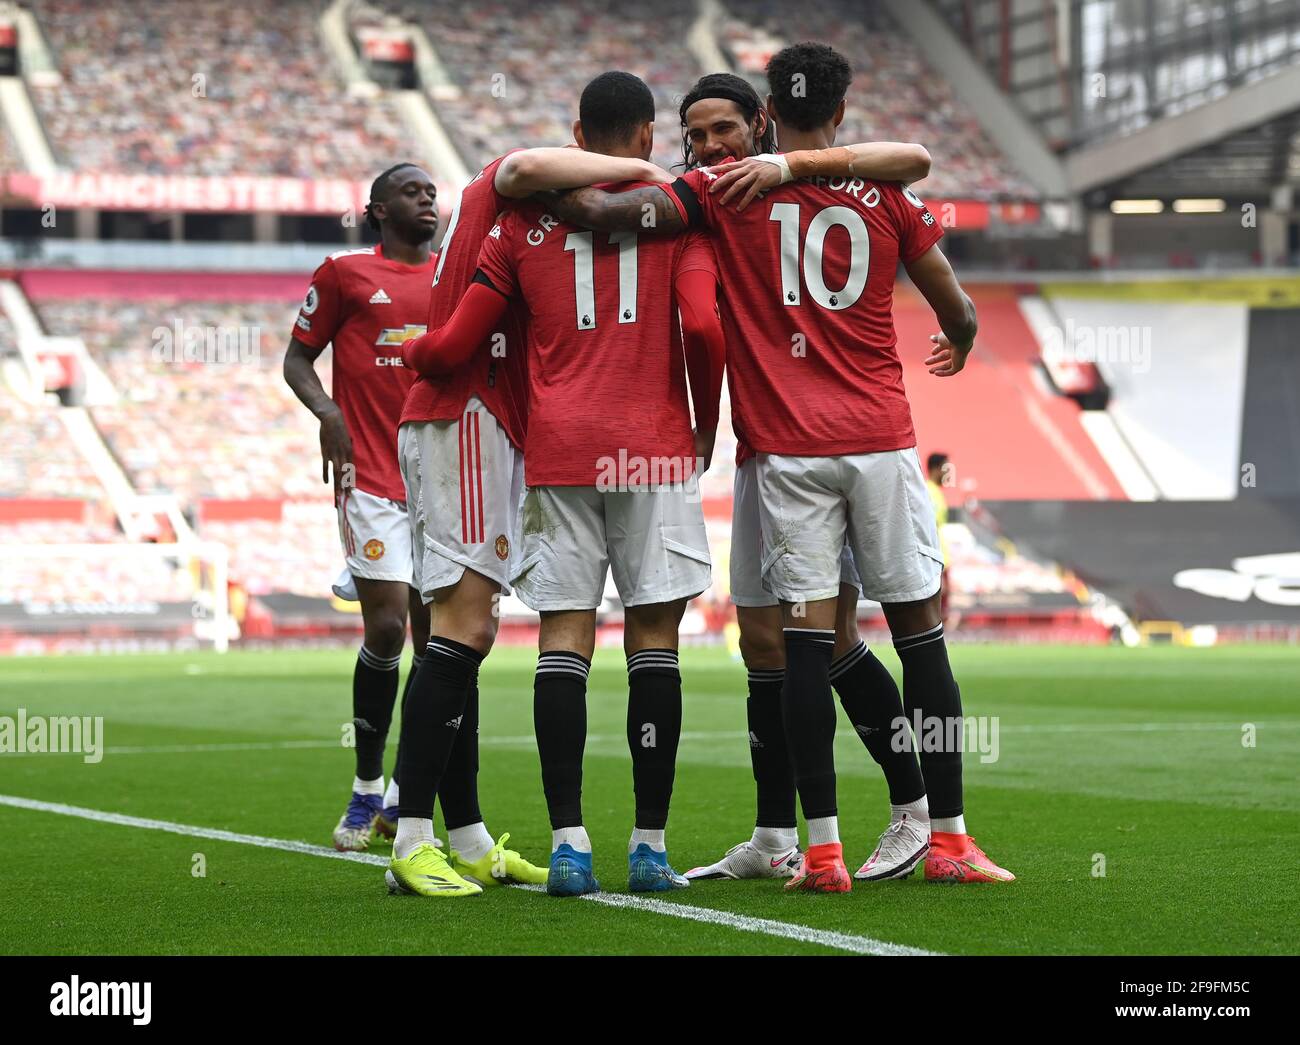 Manchester United's Mason Greenwood celebrates scoring their side's first goal of the game with Marcus Rashford during the Premier League match at Old Trafford, Manchester. Picture date: Sunday April 18, 2021. Stock Photo